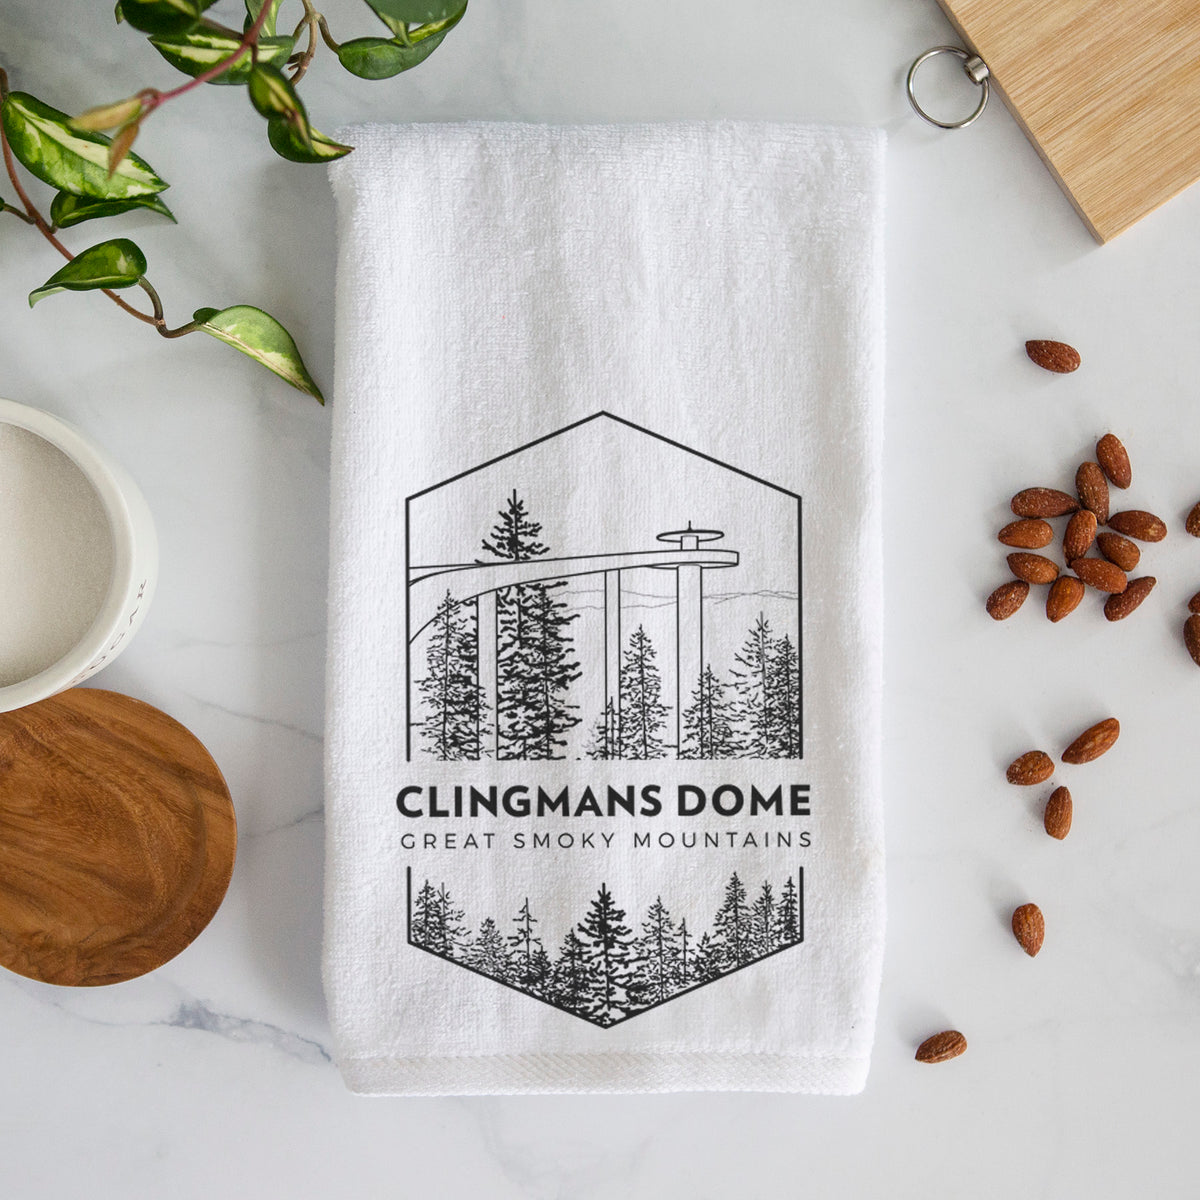 Clingmans Dome - Great Smoky Mountains National Park Hand Towel